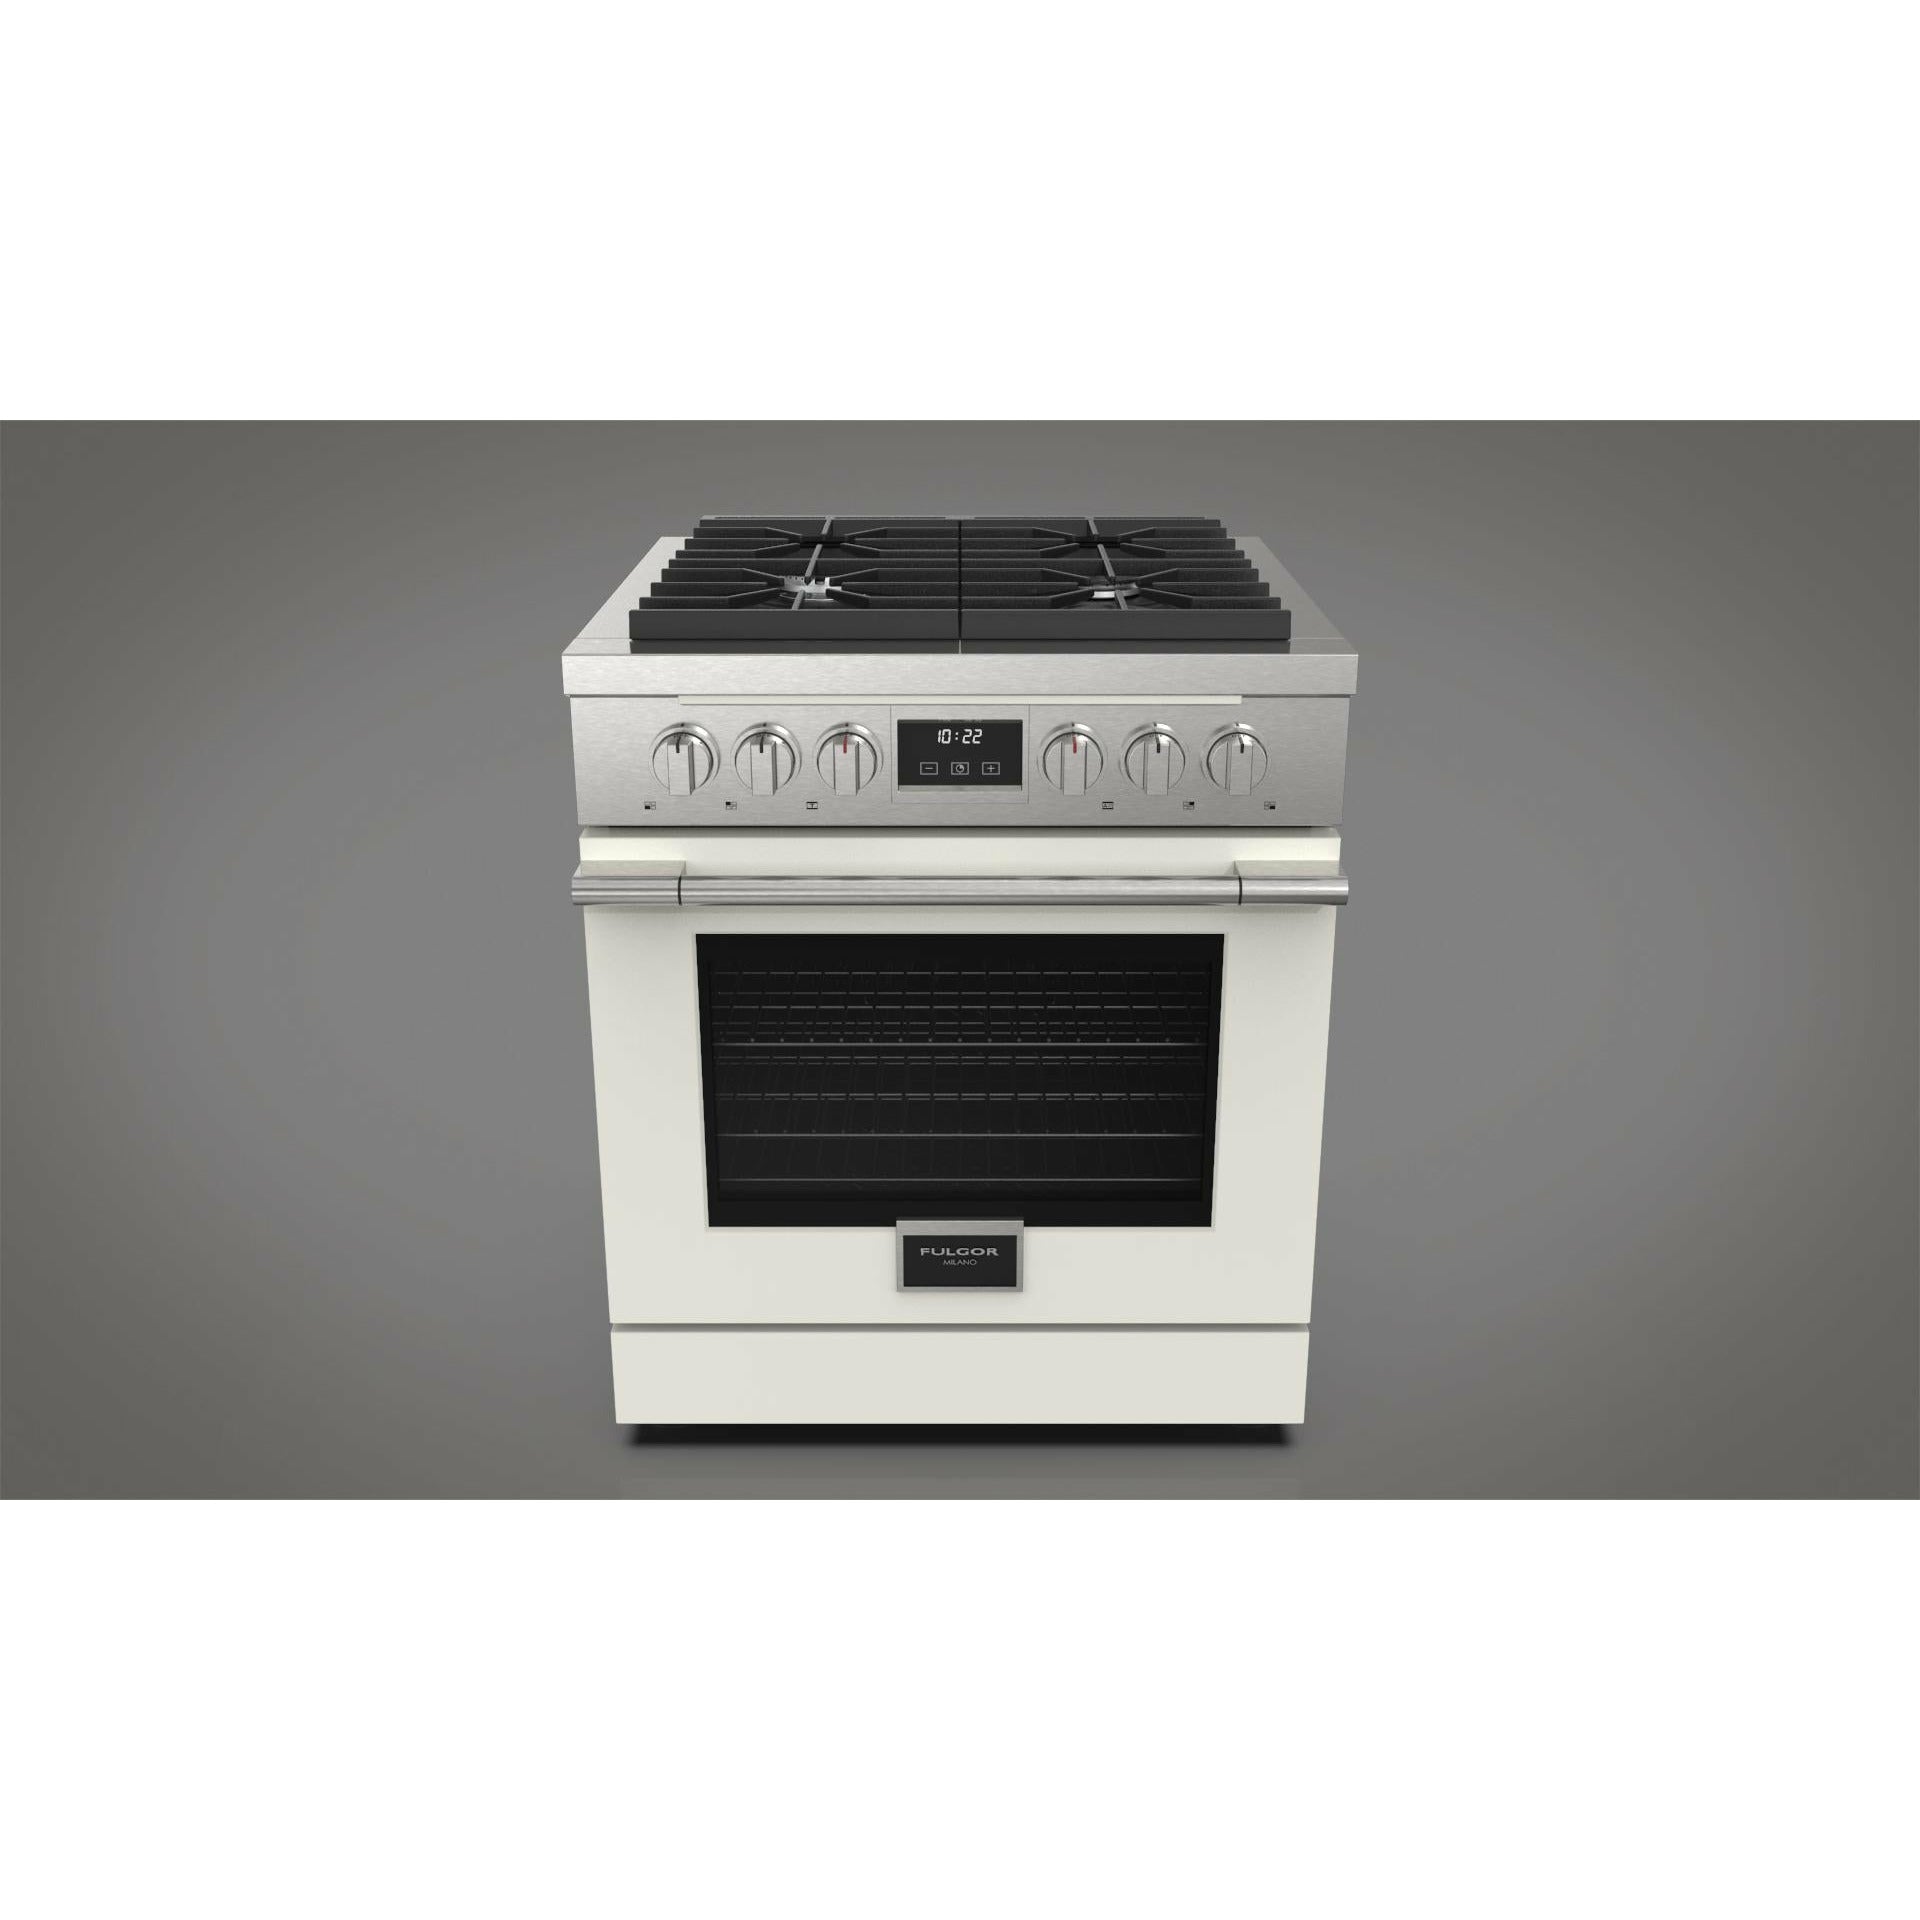 Fulgor Milano 30" Freestanding All Gas Range with 2 Duel Flame Burners, Stainless Steel - F4PGR304S2